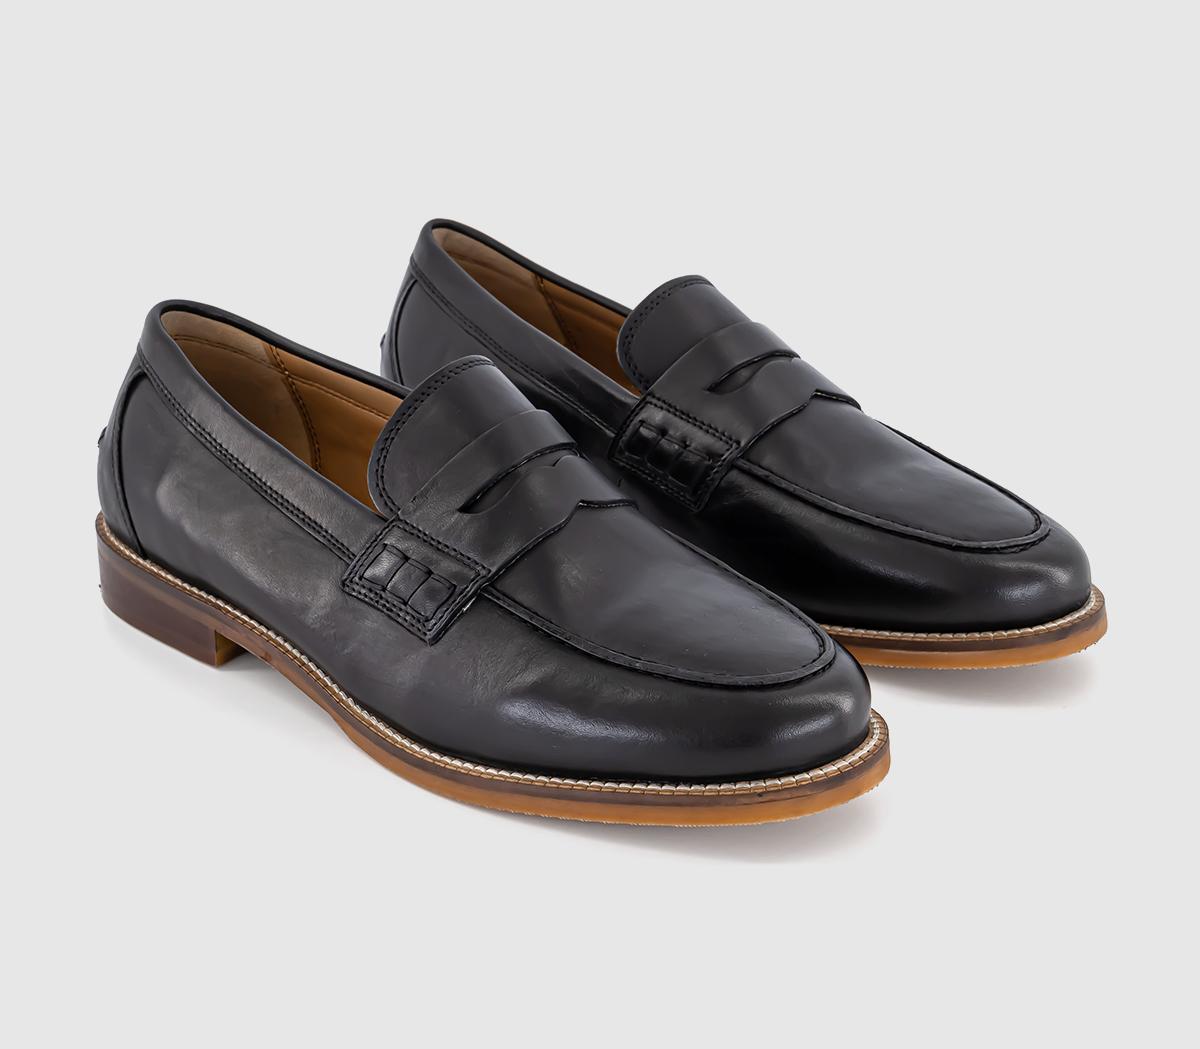 OFFICE Mens Marlborough Penny Loafers Black Leather, 9